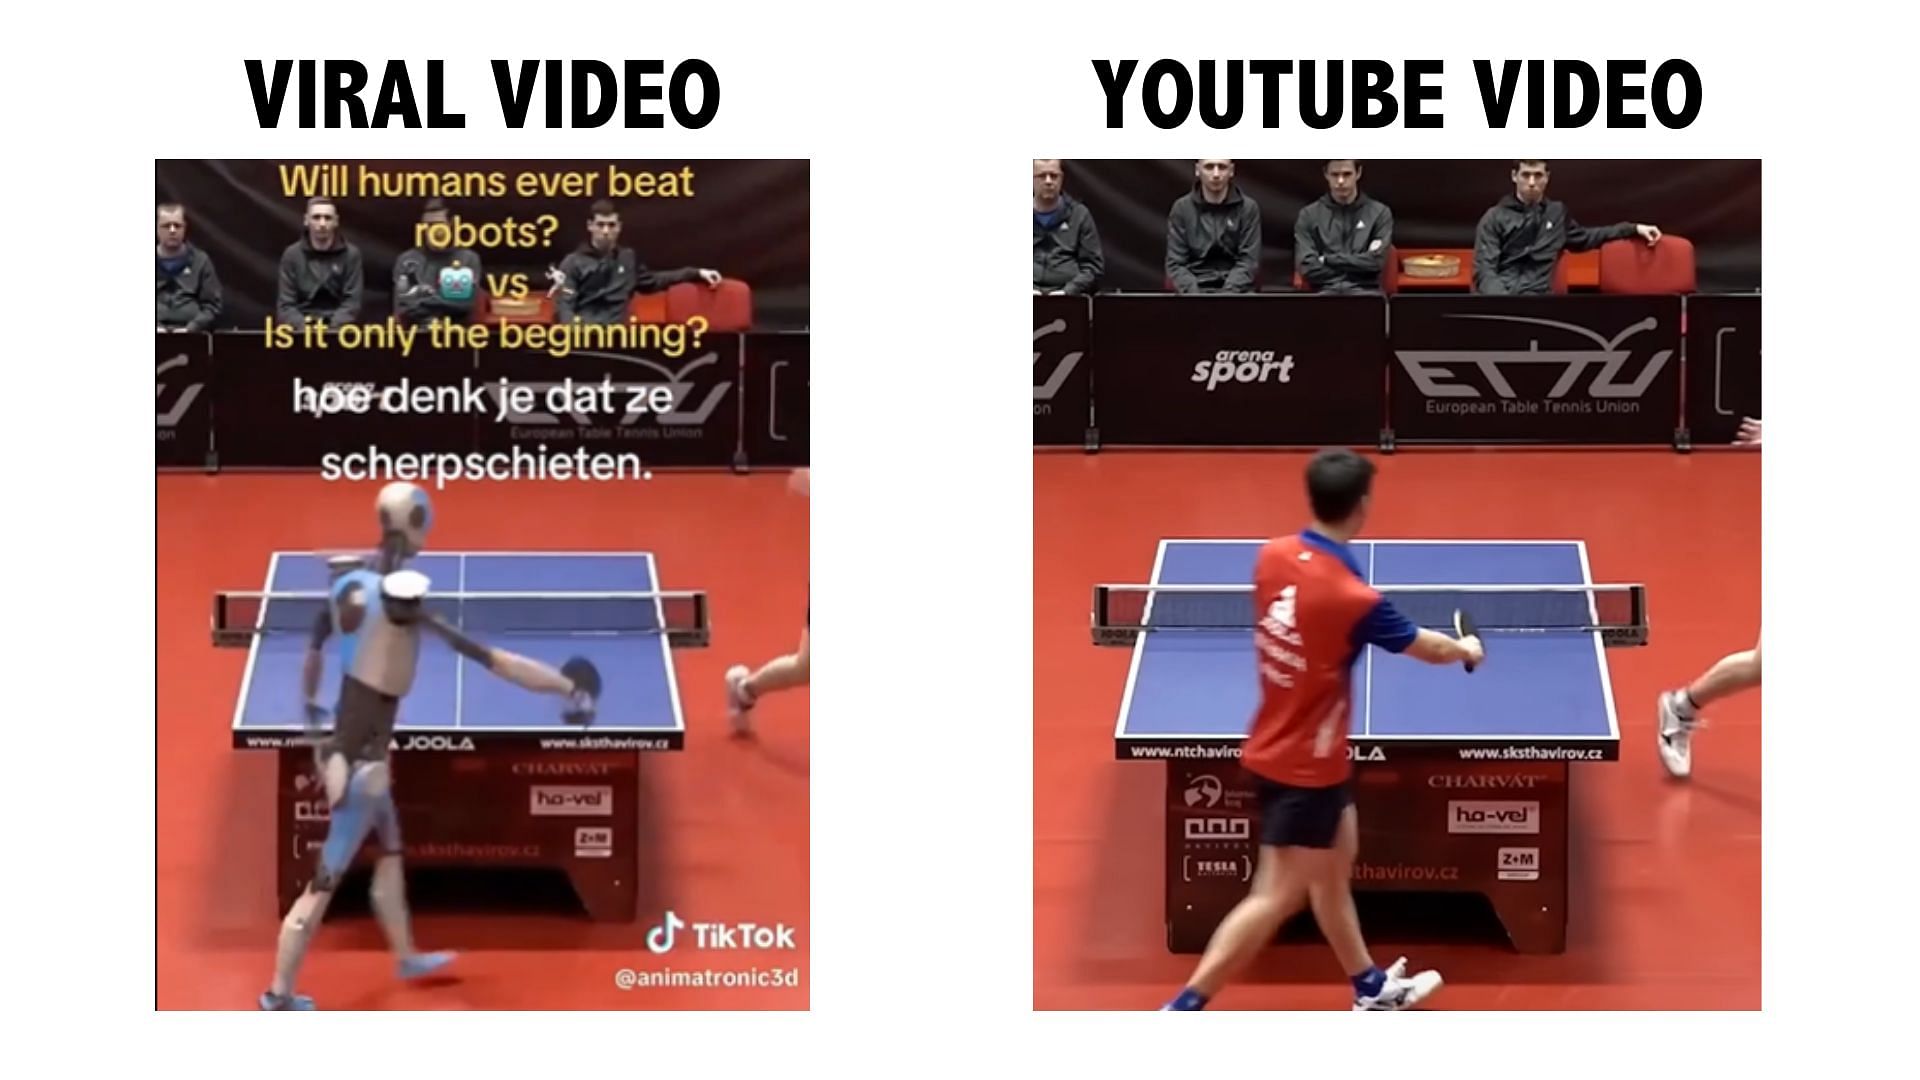 Fact-Check This Video Showing Robot Playing a Table Tennis Match With Human Is Altered